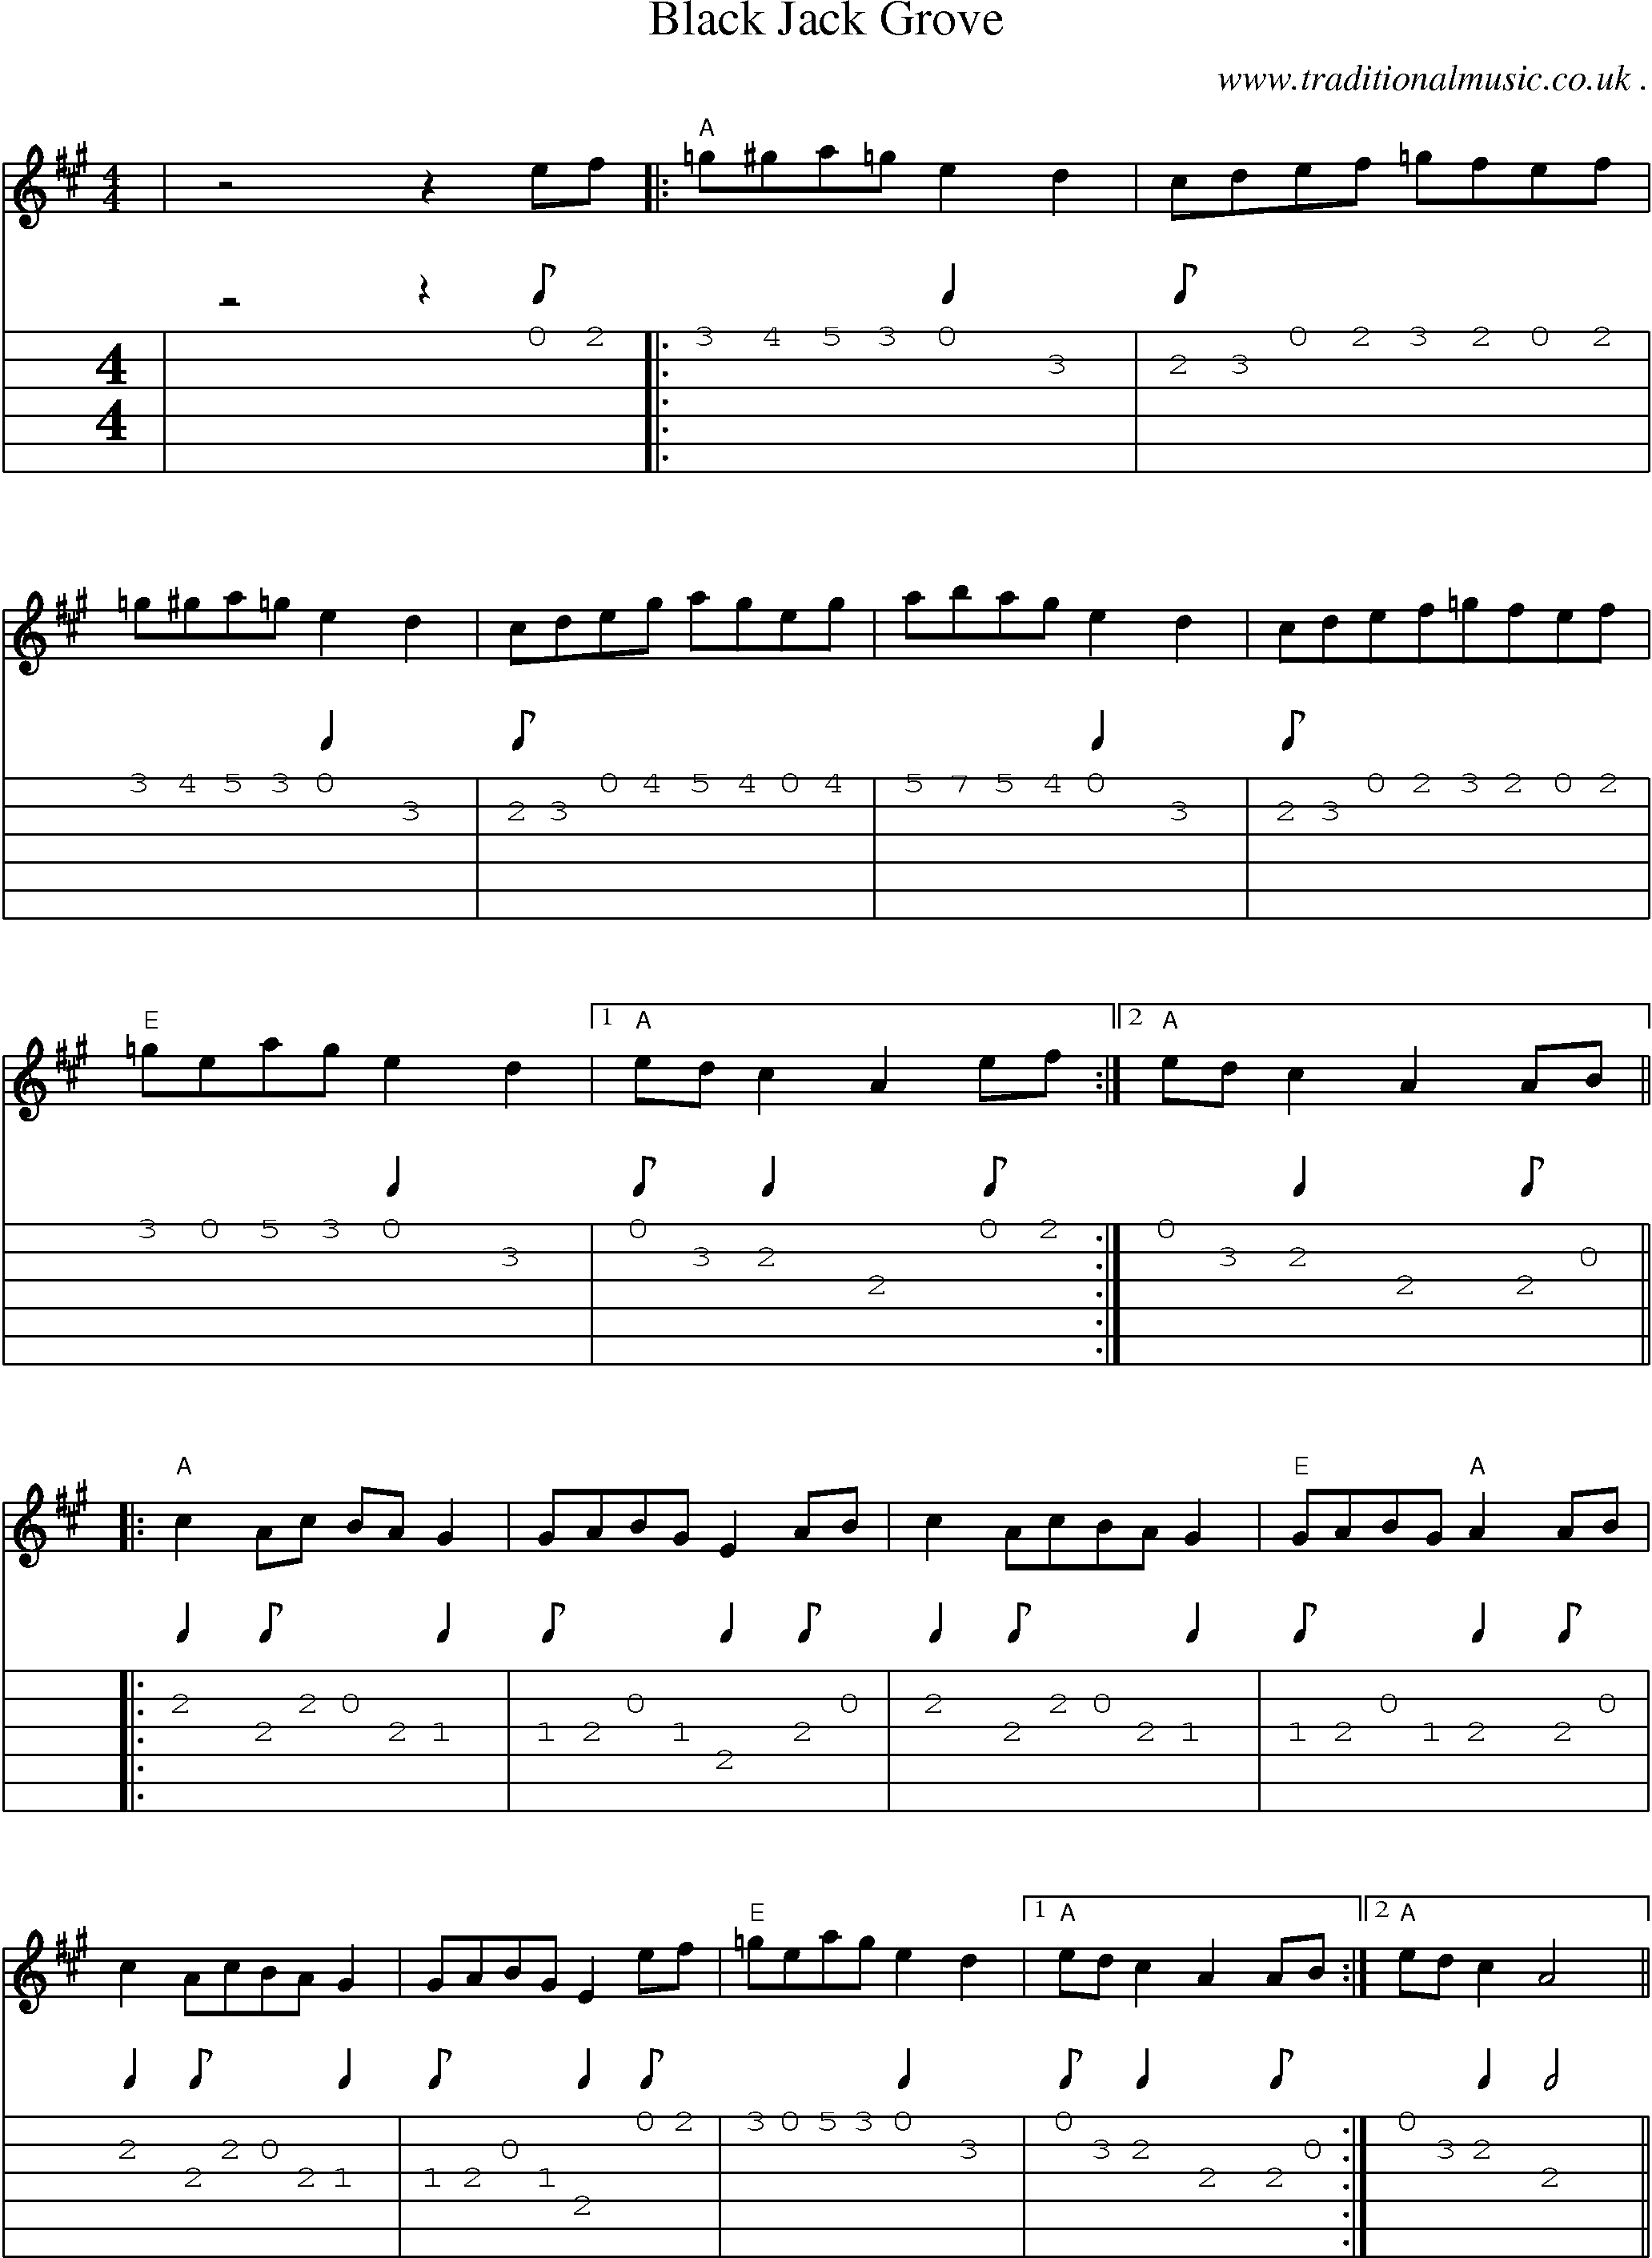 Music Score and Guitar Tabs for Black Jack Grove